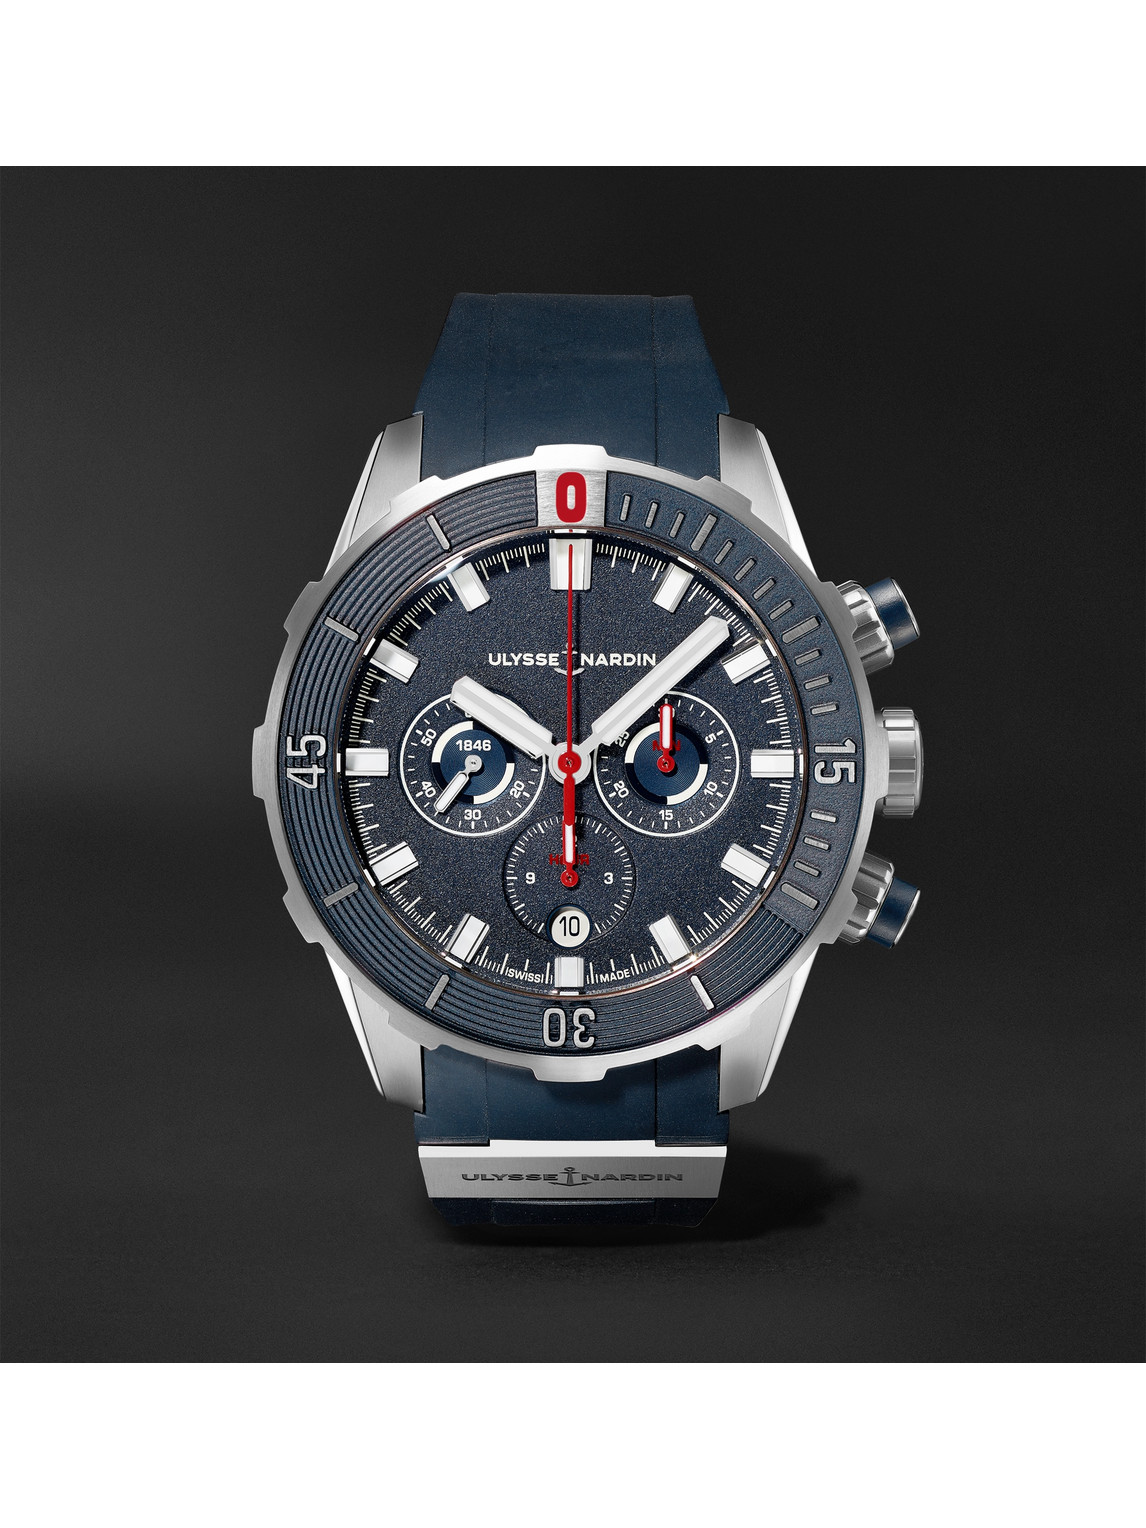 Ulysse Nardin Diver Automatic Chronograph 44mm Titanium And Rubber Watch, Ref. No. 1503-170-3/93 In Blue